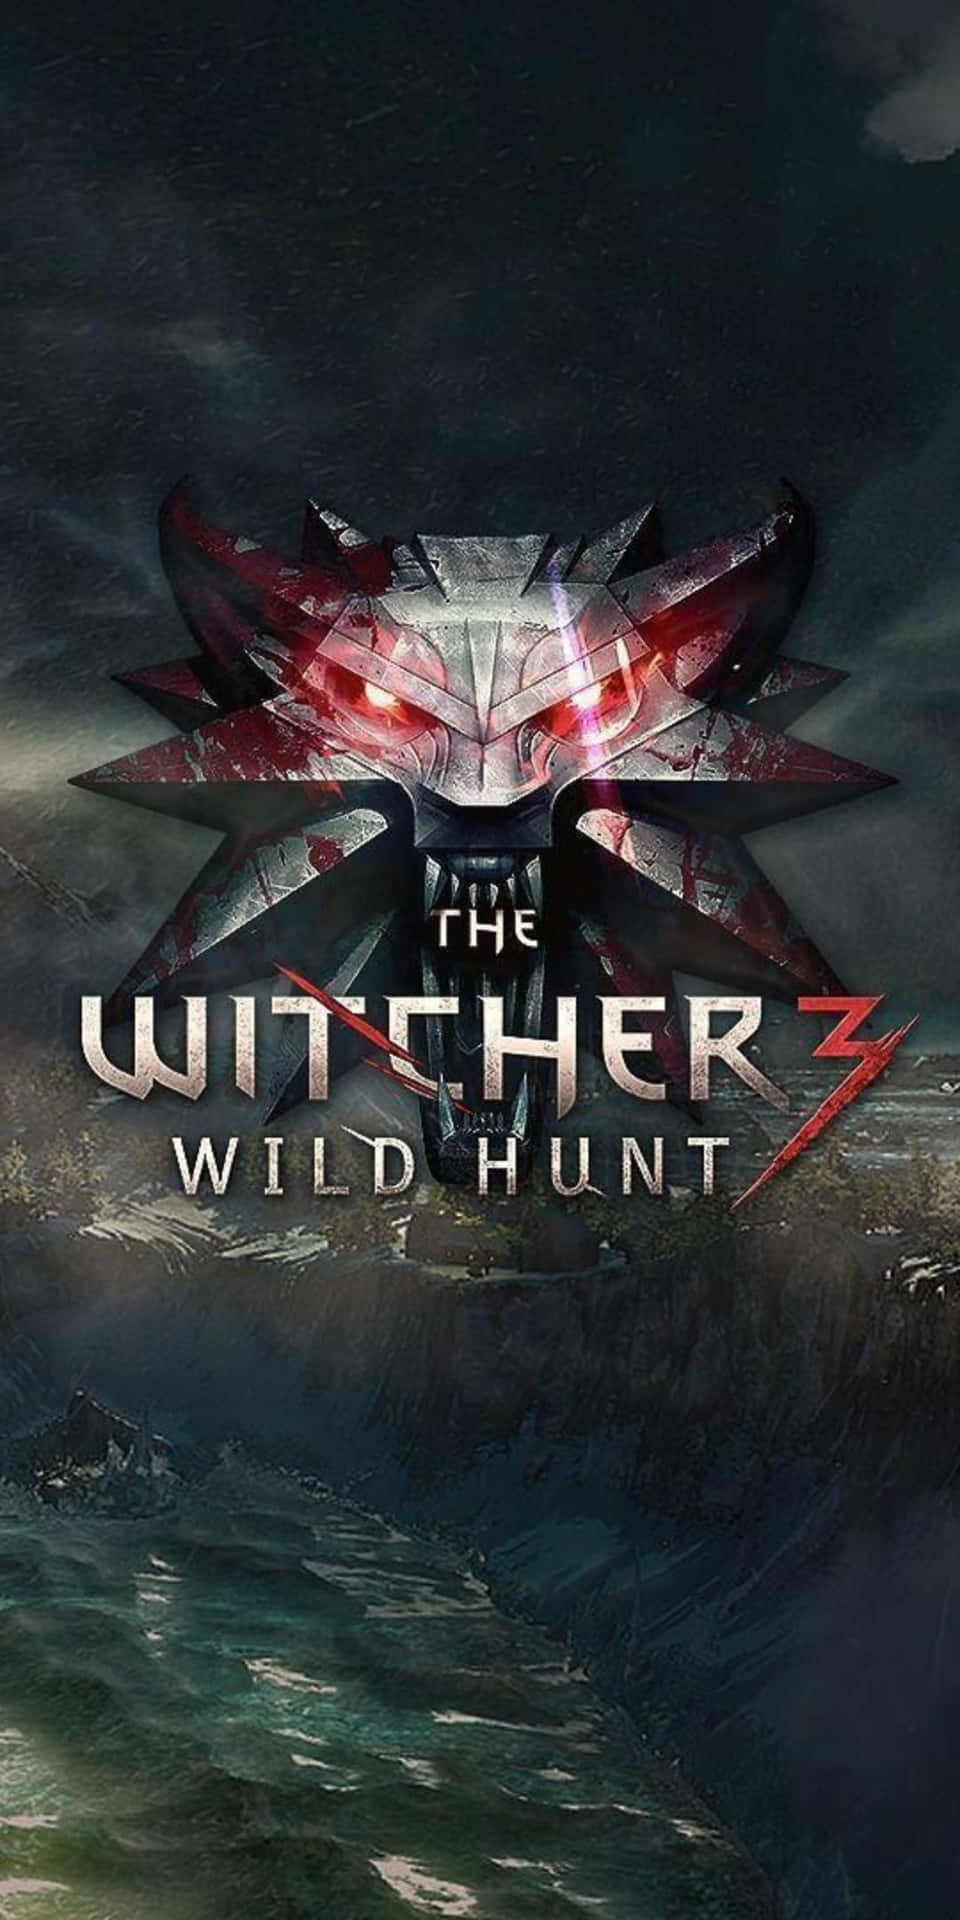 Explore and Experience the Epic Adventure of The Witcher 3 on your Pixel 3